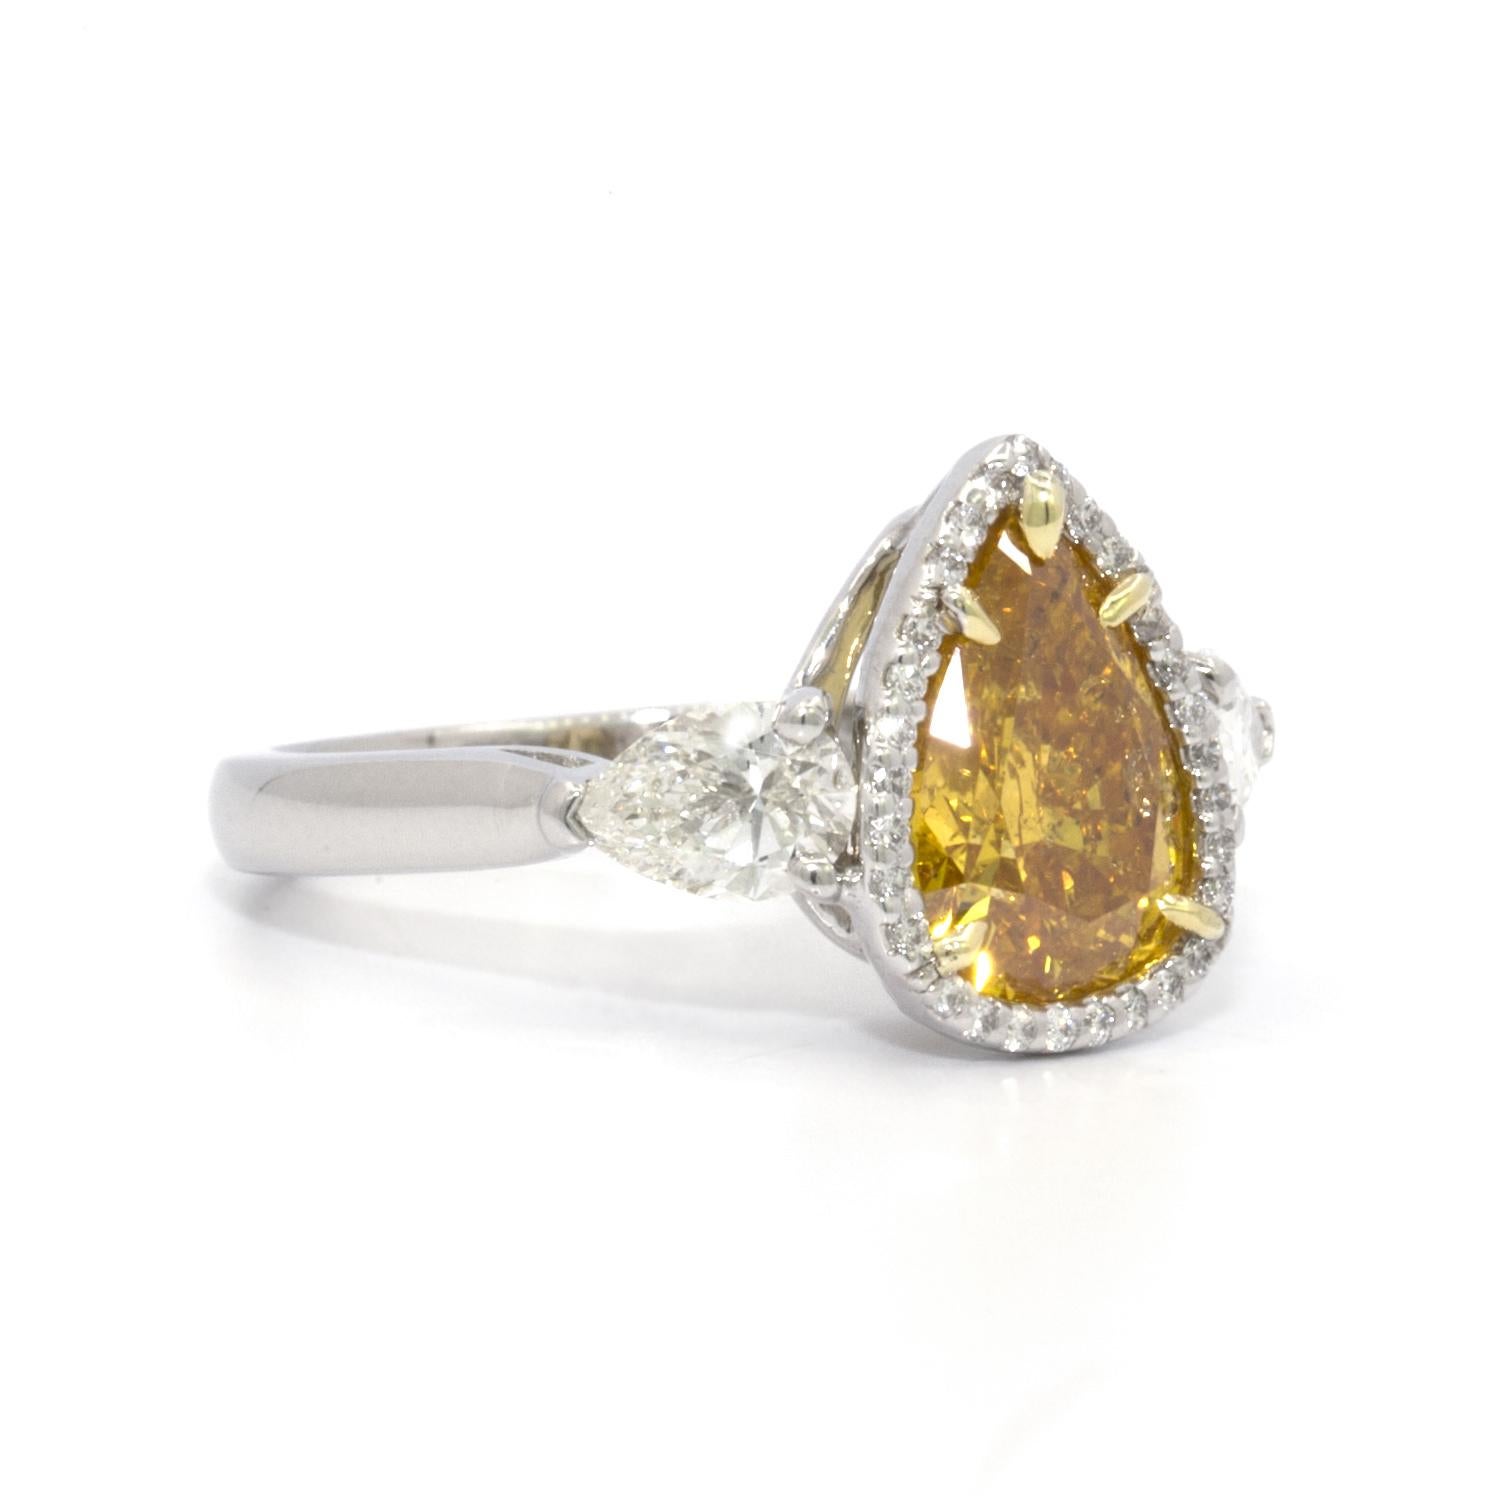 This GIA certified 2.20 ct Pear Brilliant Vivid Yellow-Orange Diamond is a truly unique ring. The brilliant cut and the brightness of the yellow color, combined with the warmth of the orange color make this diamond uniquely beautiful. GIA report